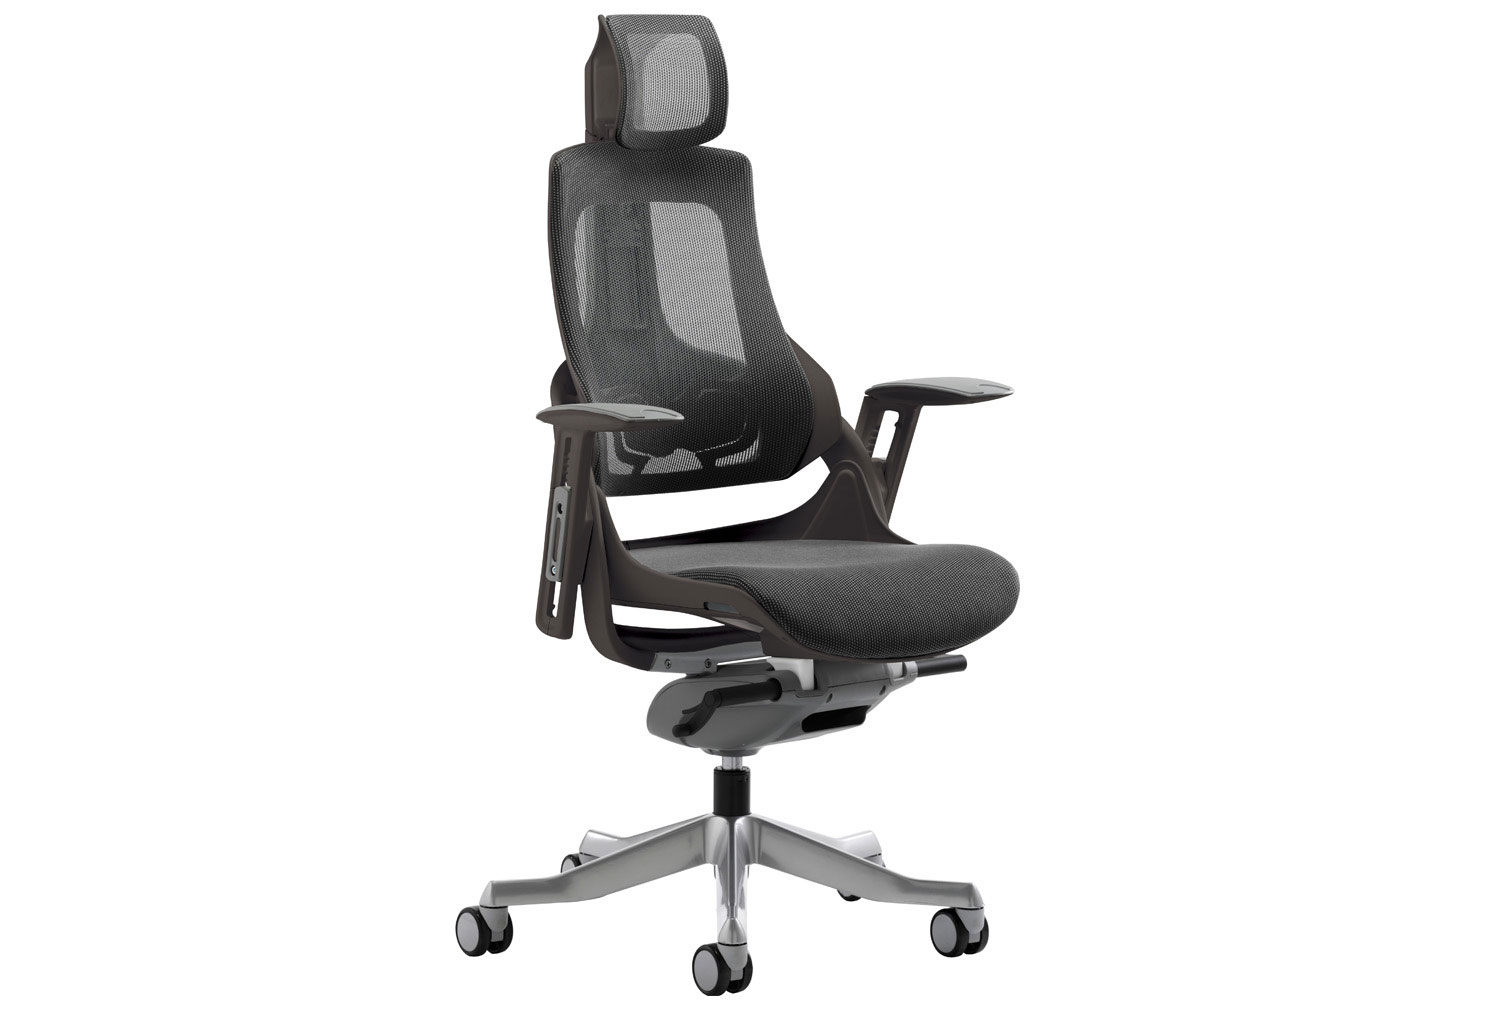 Zephyr Mesh Back Executive Operator Office Chair With Headrest (Black), Express Delivery